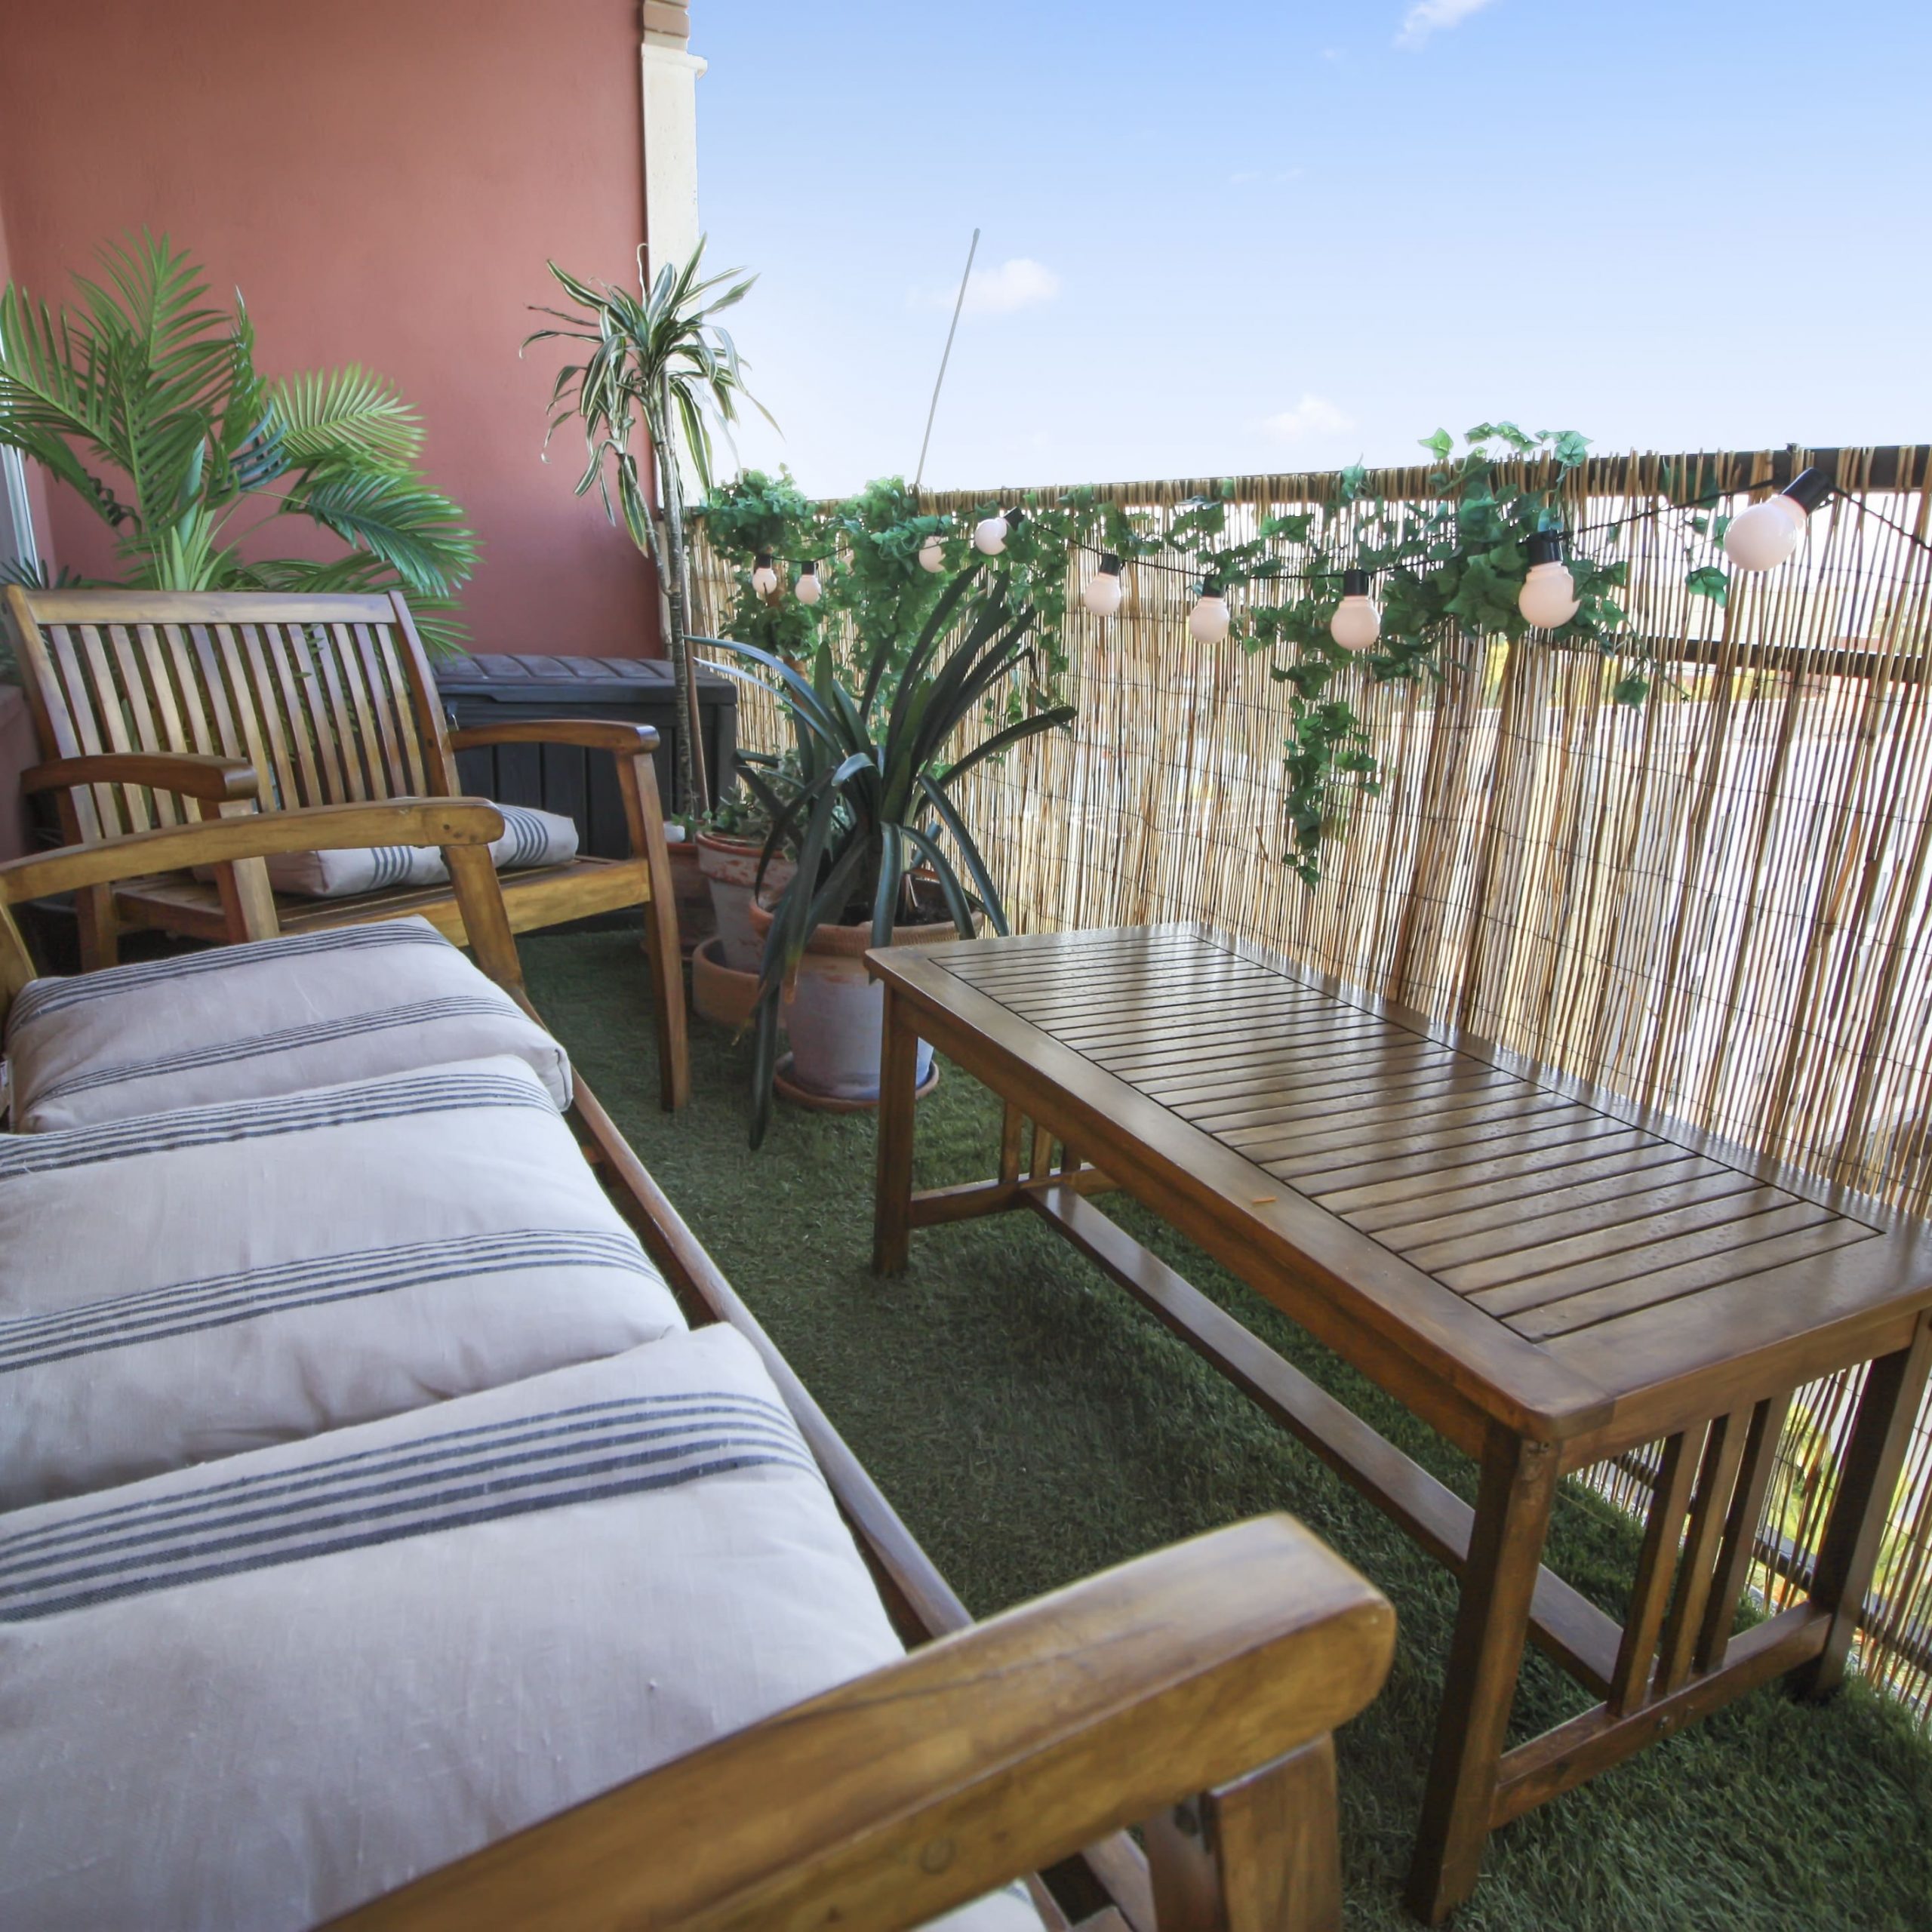 3 BEDROOM APARTMENT IN VALENCIA FOR EXPATS